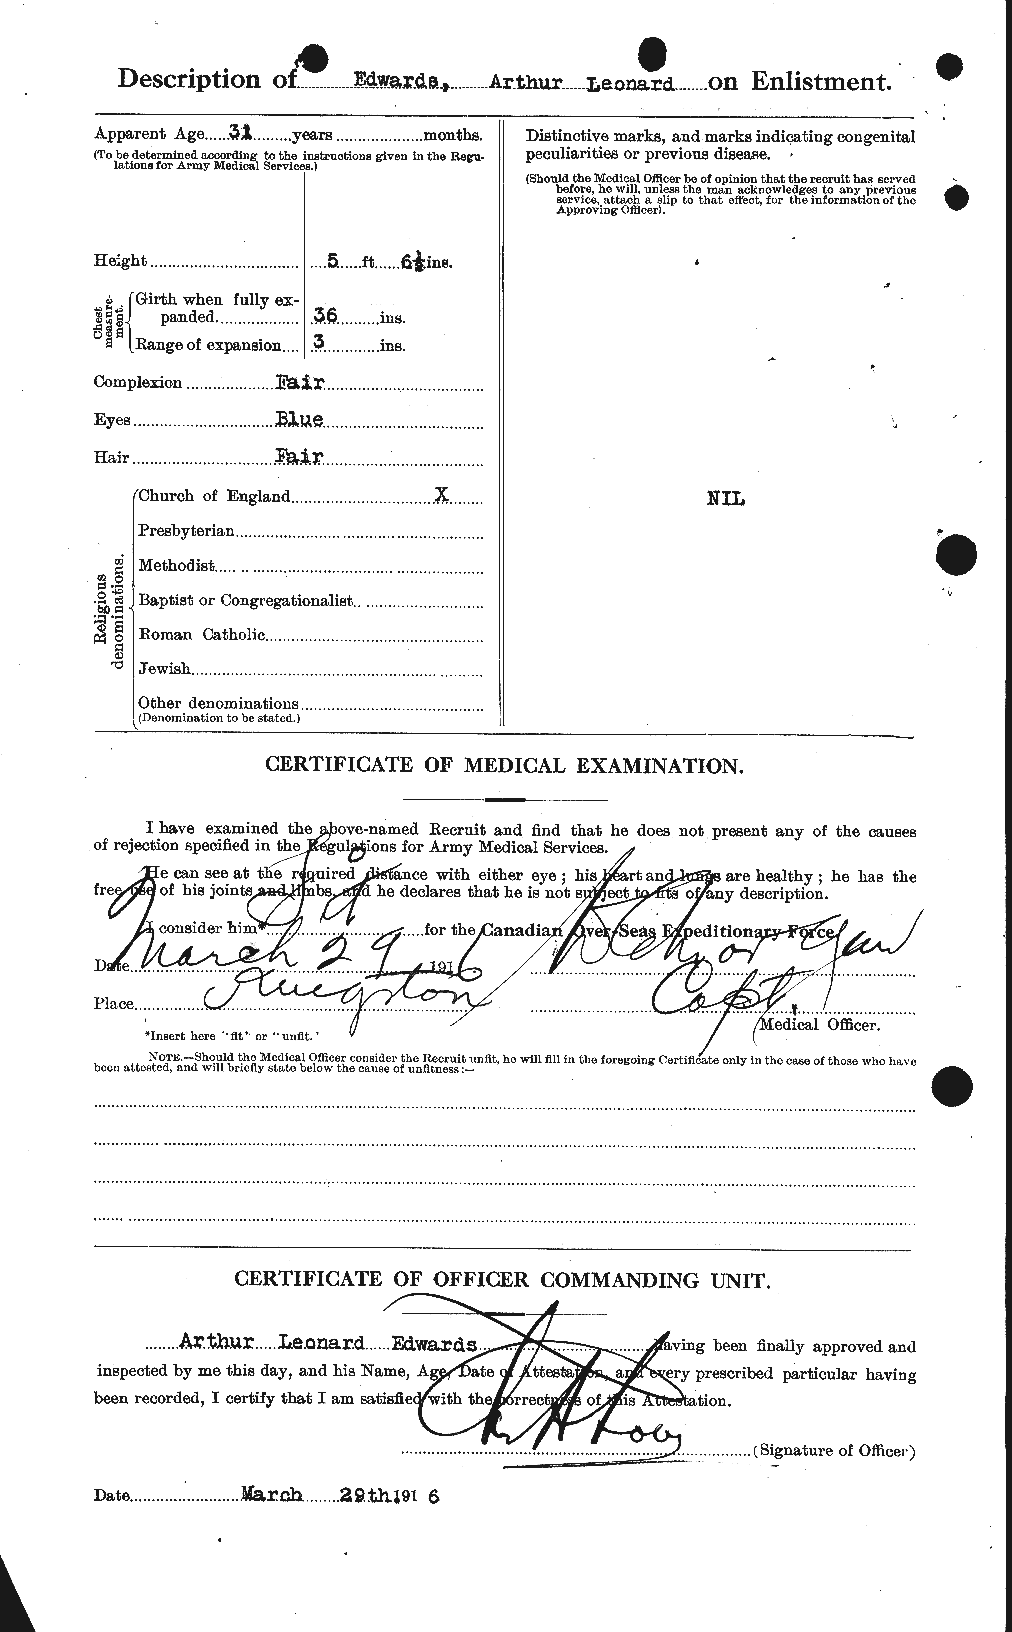 Personnel Records of the First World War - CEF 313143b